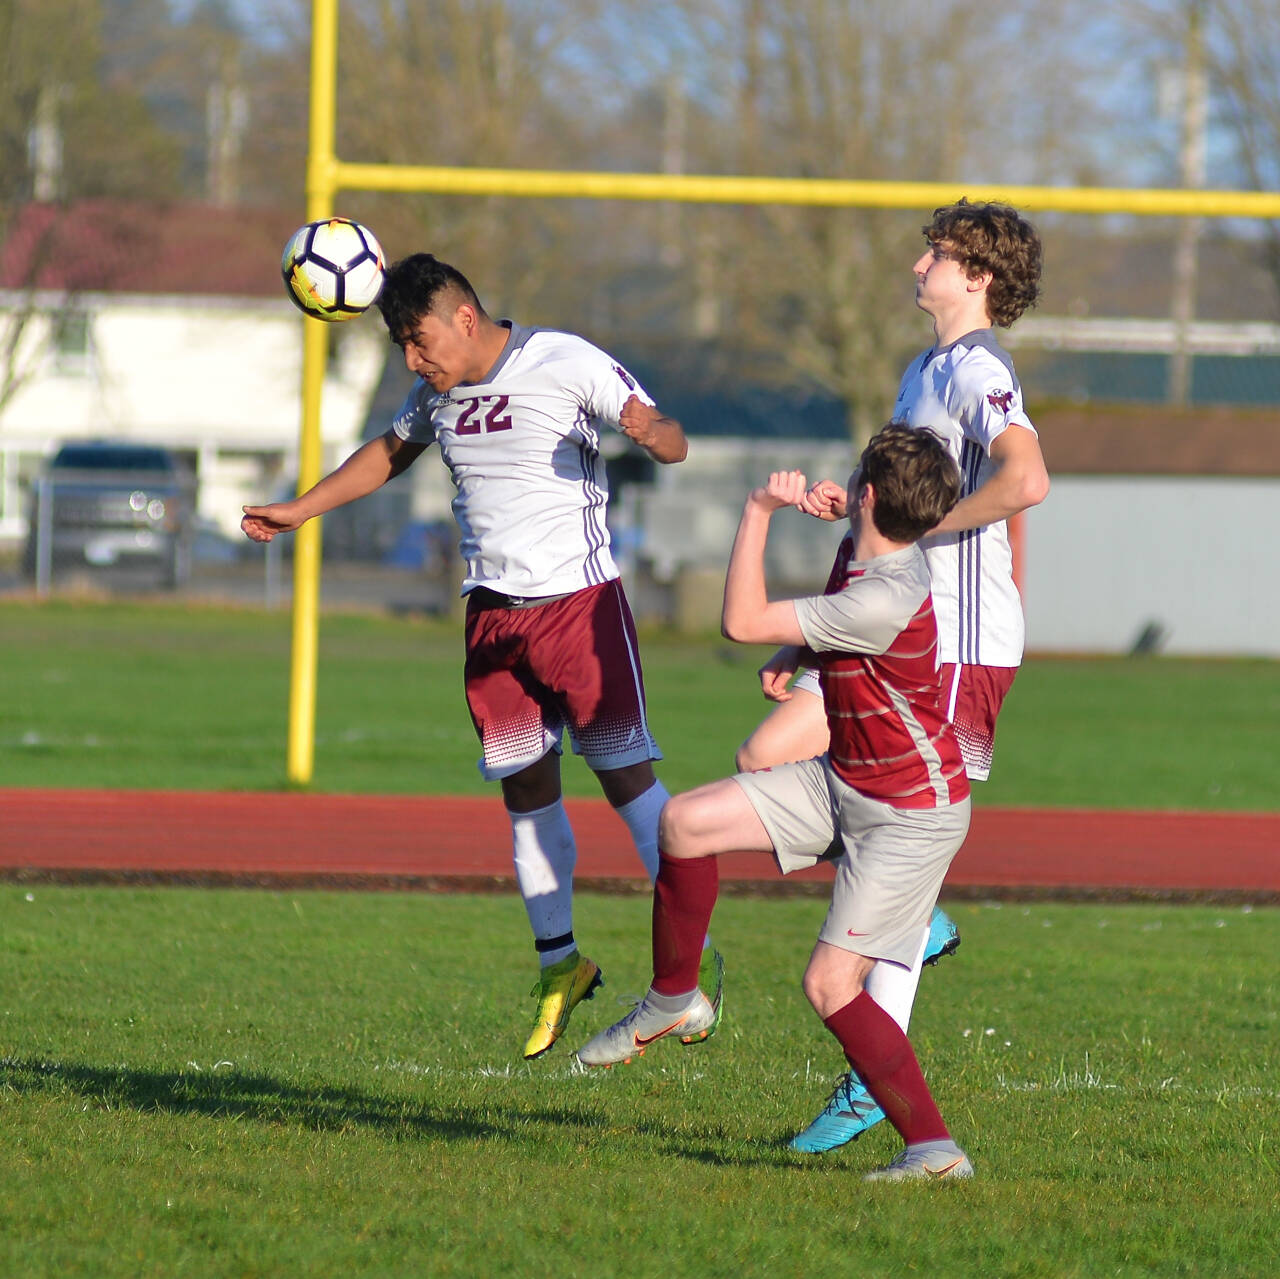 RYAN SPARKS | THE DAILY WORLD Montesano’s Daniel Vasquez (22) heads the ball forward during the Bulldogs’ 3-1 win on Tuesday at Sea Breeze Oval in Hoquiam.